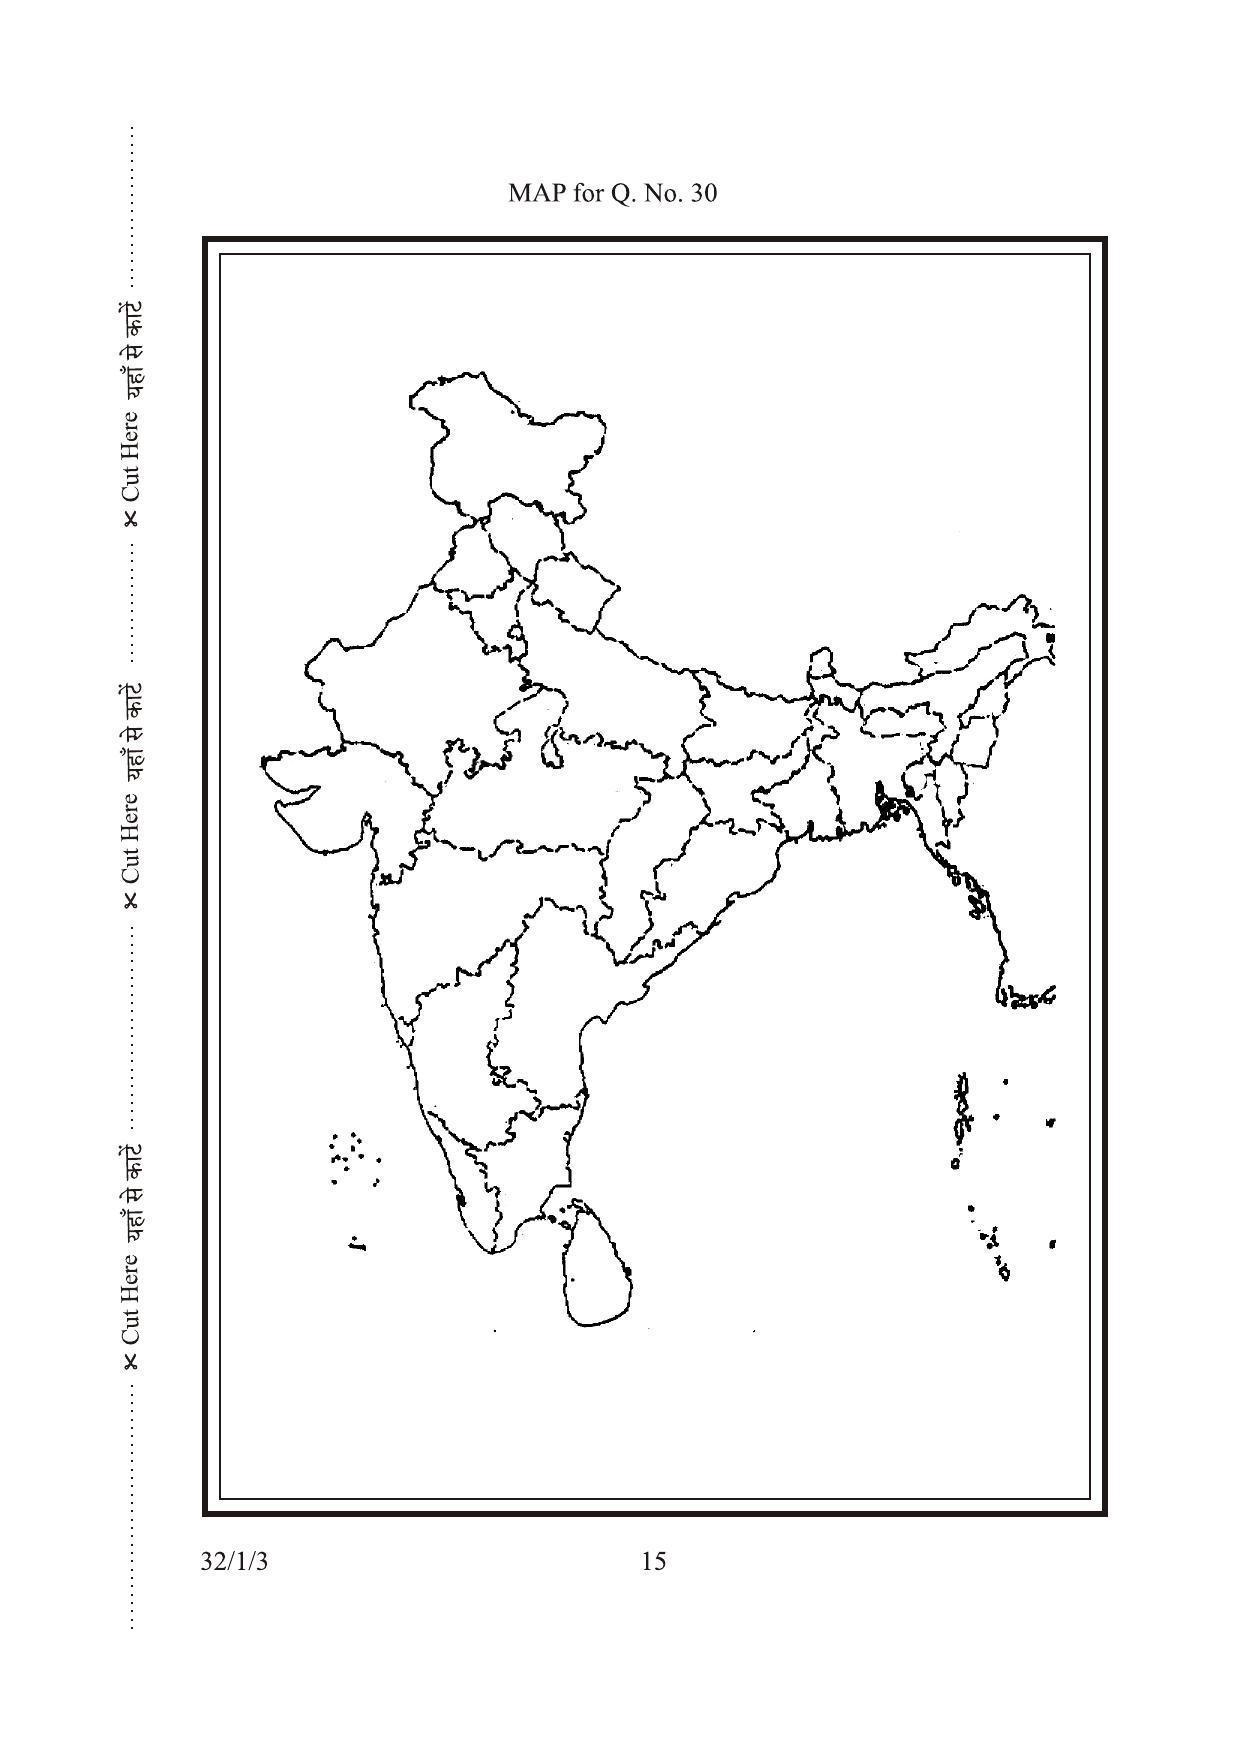 CBSE Class 10 32-1-3 Map SOCIAL SCIENCE 2016 Question Paper - Page 2